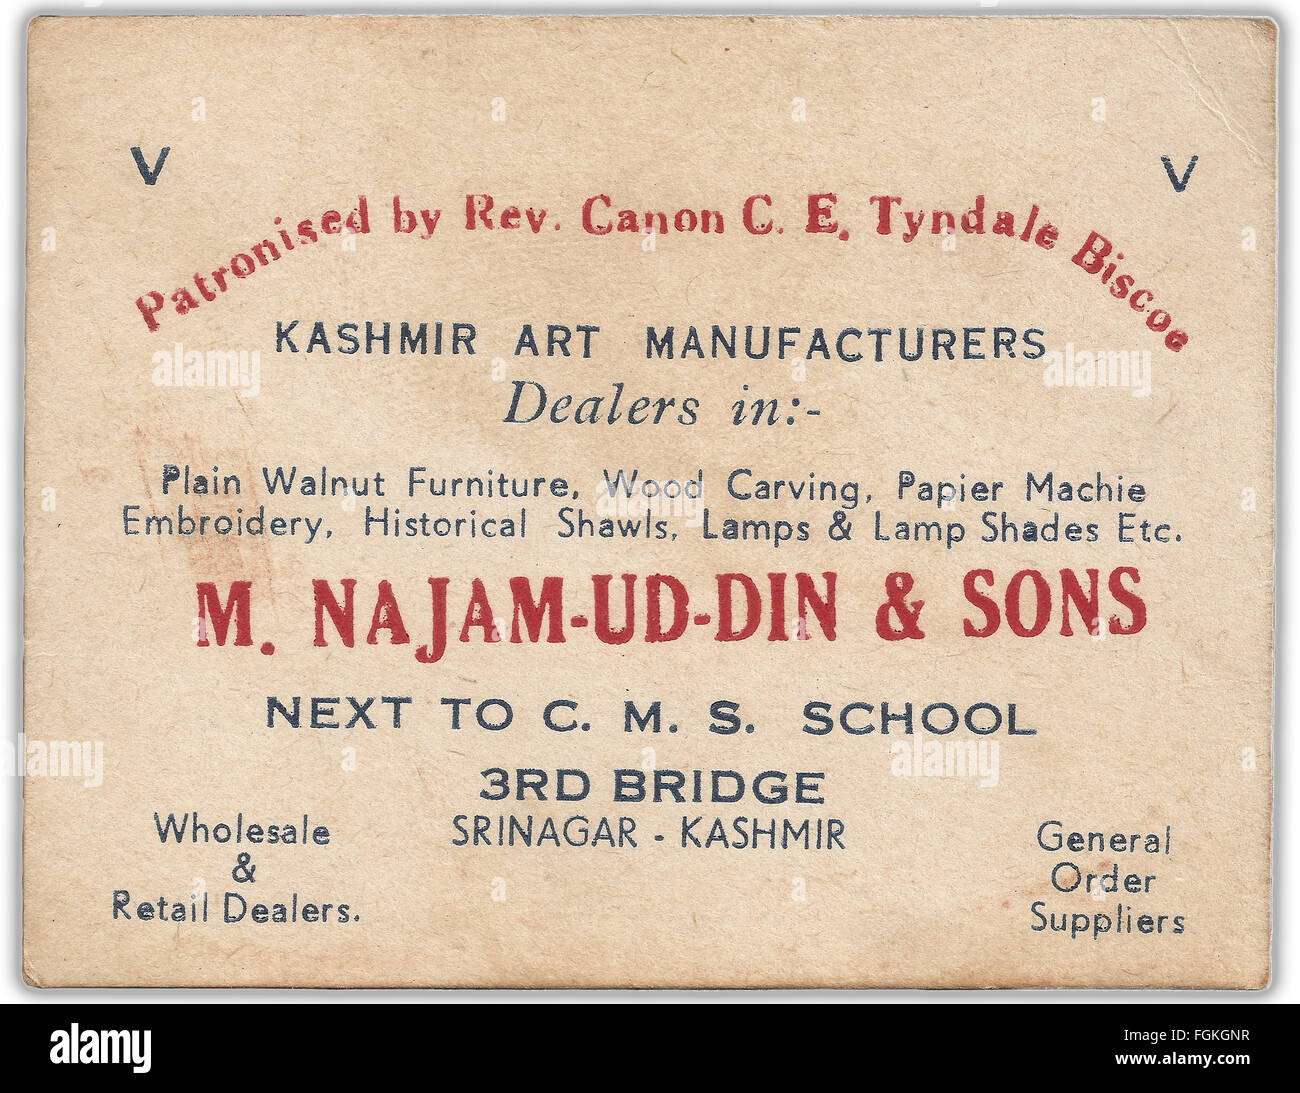 Business card for M. Najam-Ud-Din and Sons, of Srinagar, Kashmir, India. Stock Photo